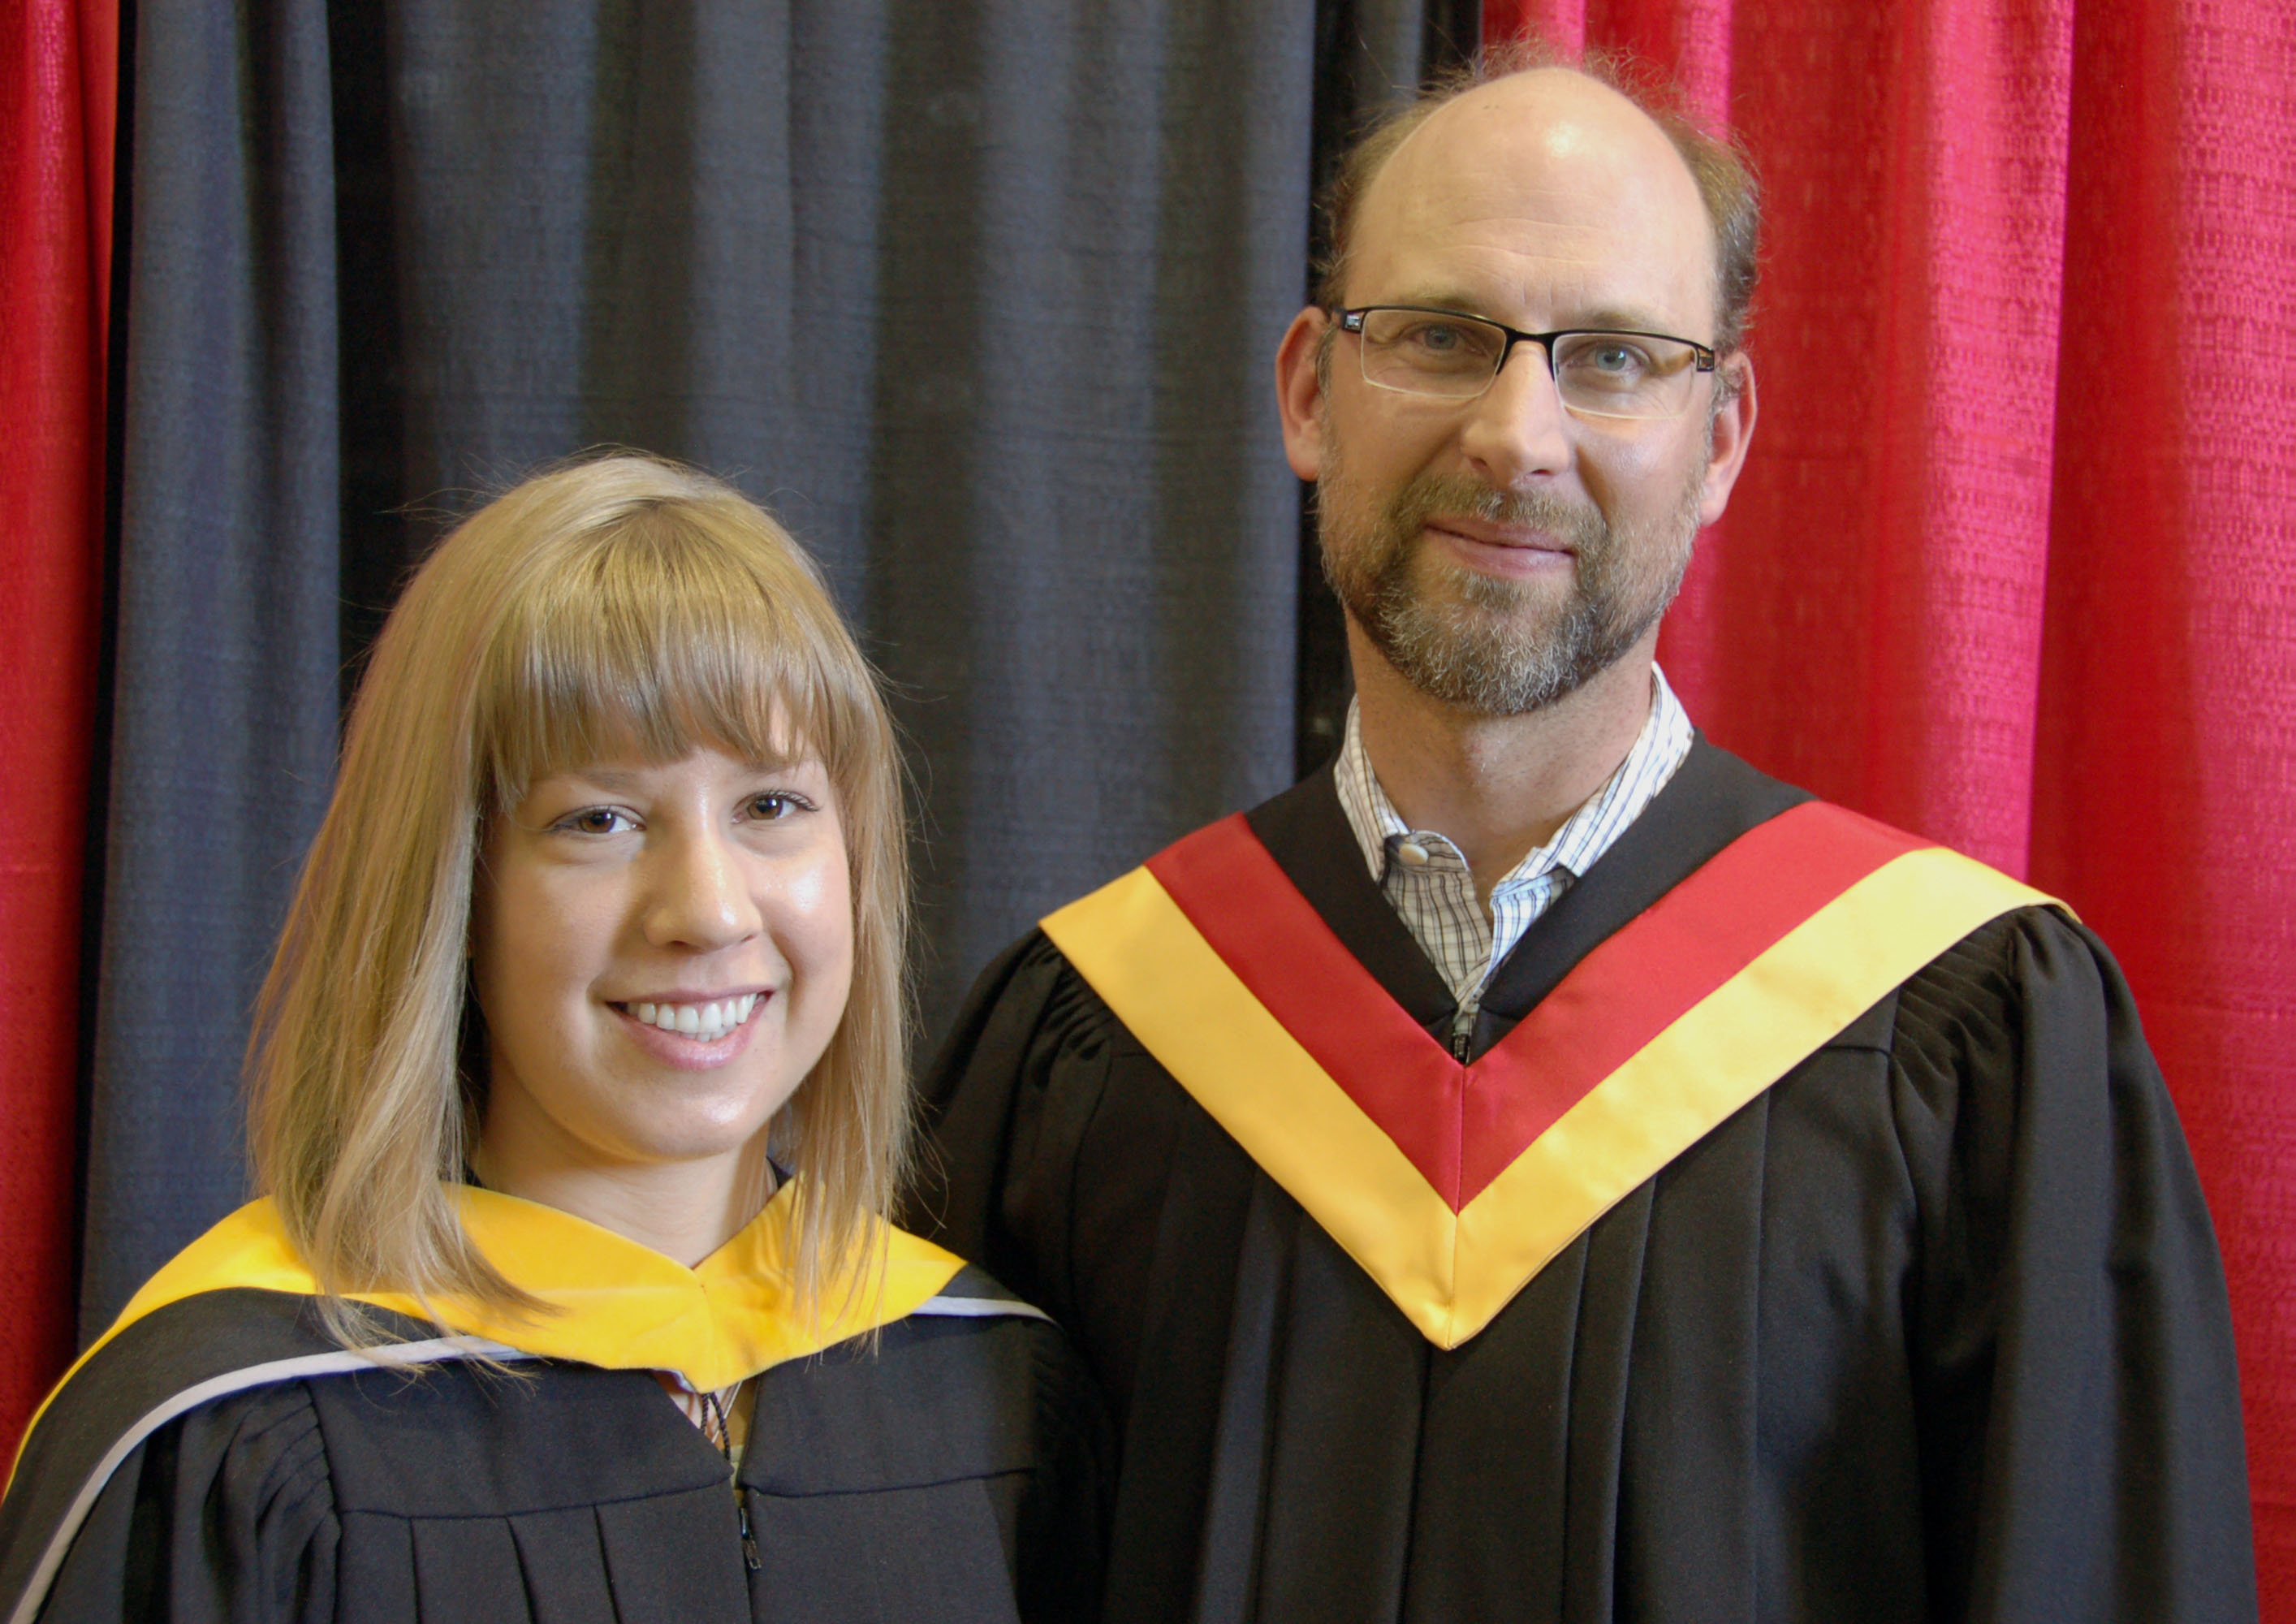 Master of Science in Geography - Melissa Nacke "Characterization of the Coastal Marine Environment in the Vicinity of a Grounded Iceberg, Canadian Artic Archipelago". Supervisor: Derek Mueller 